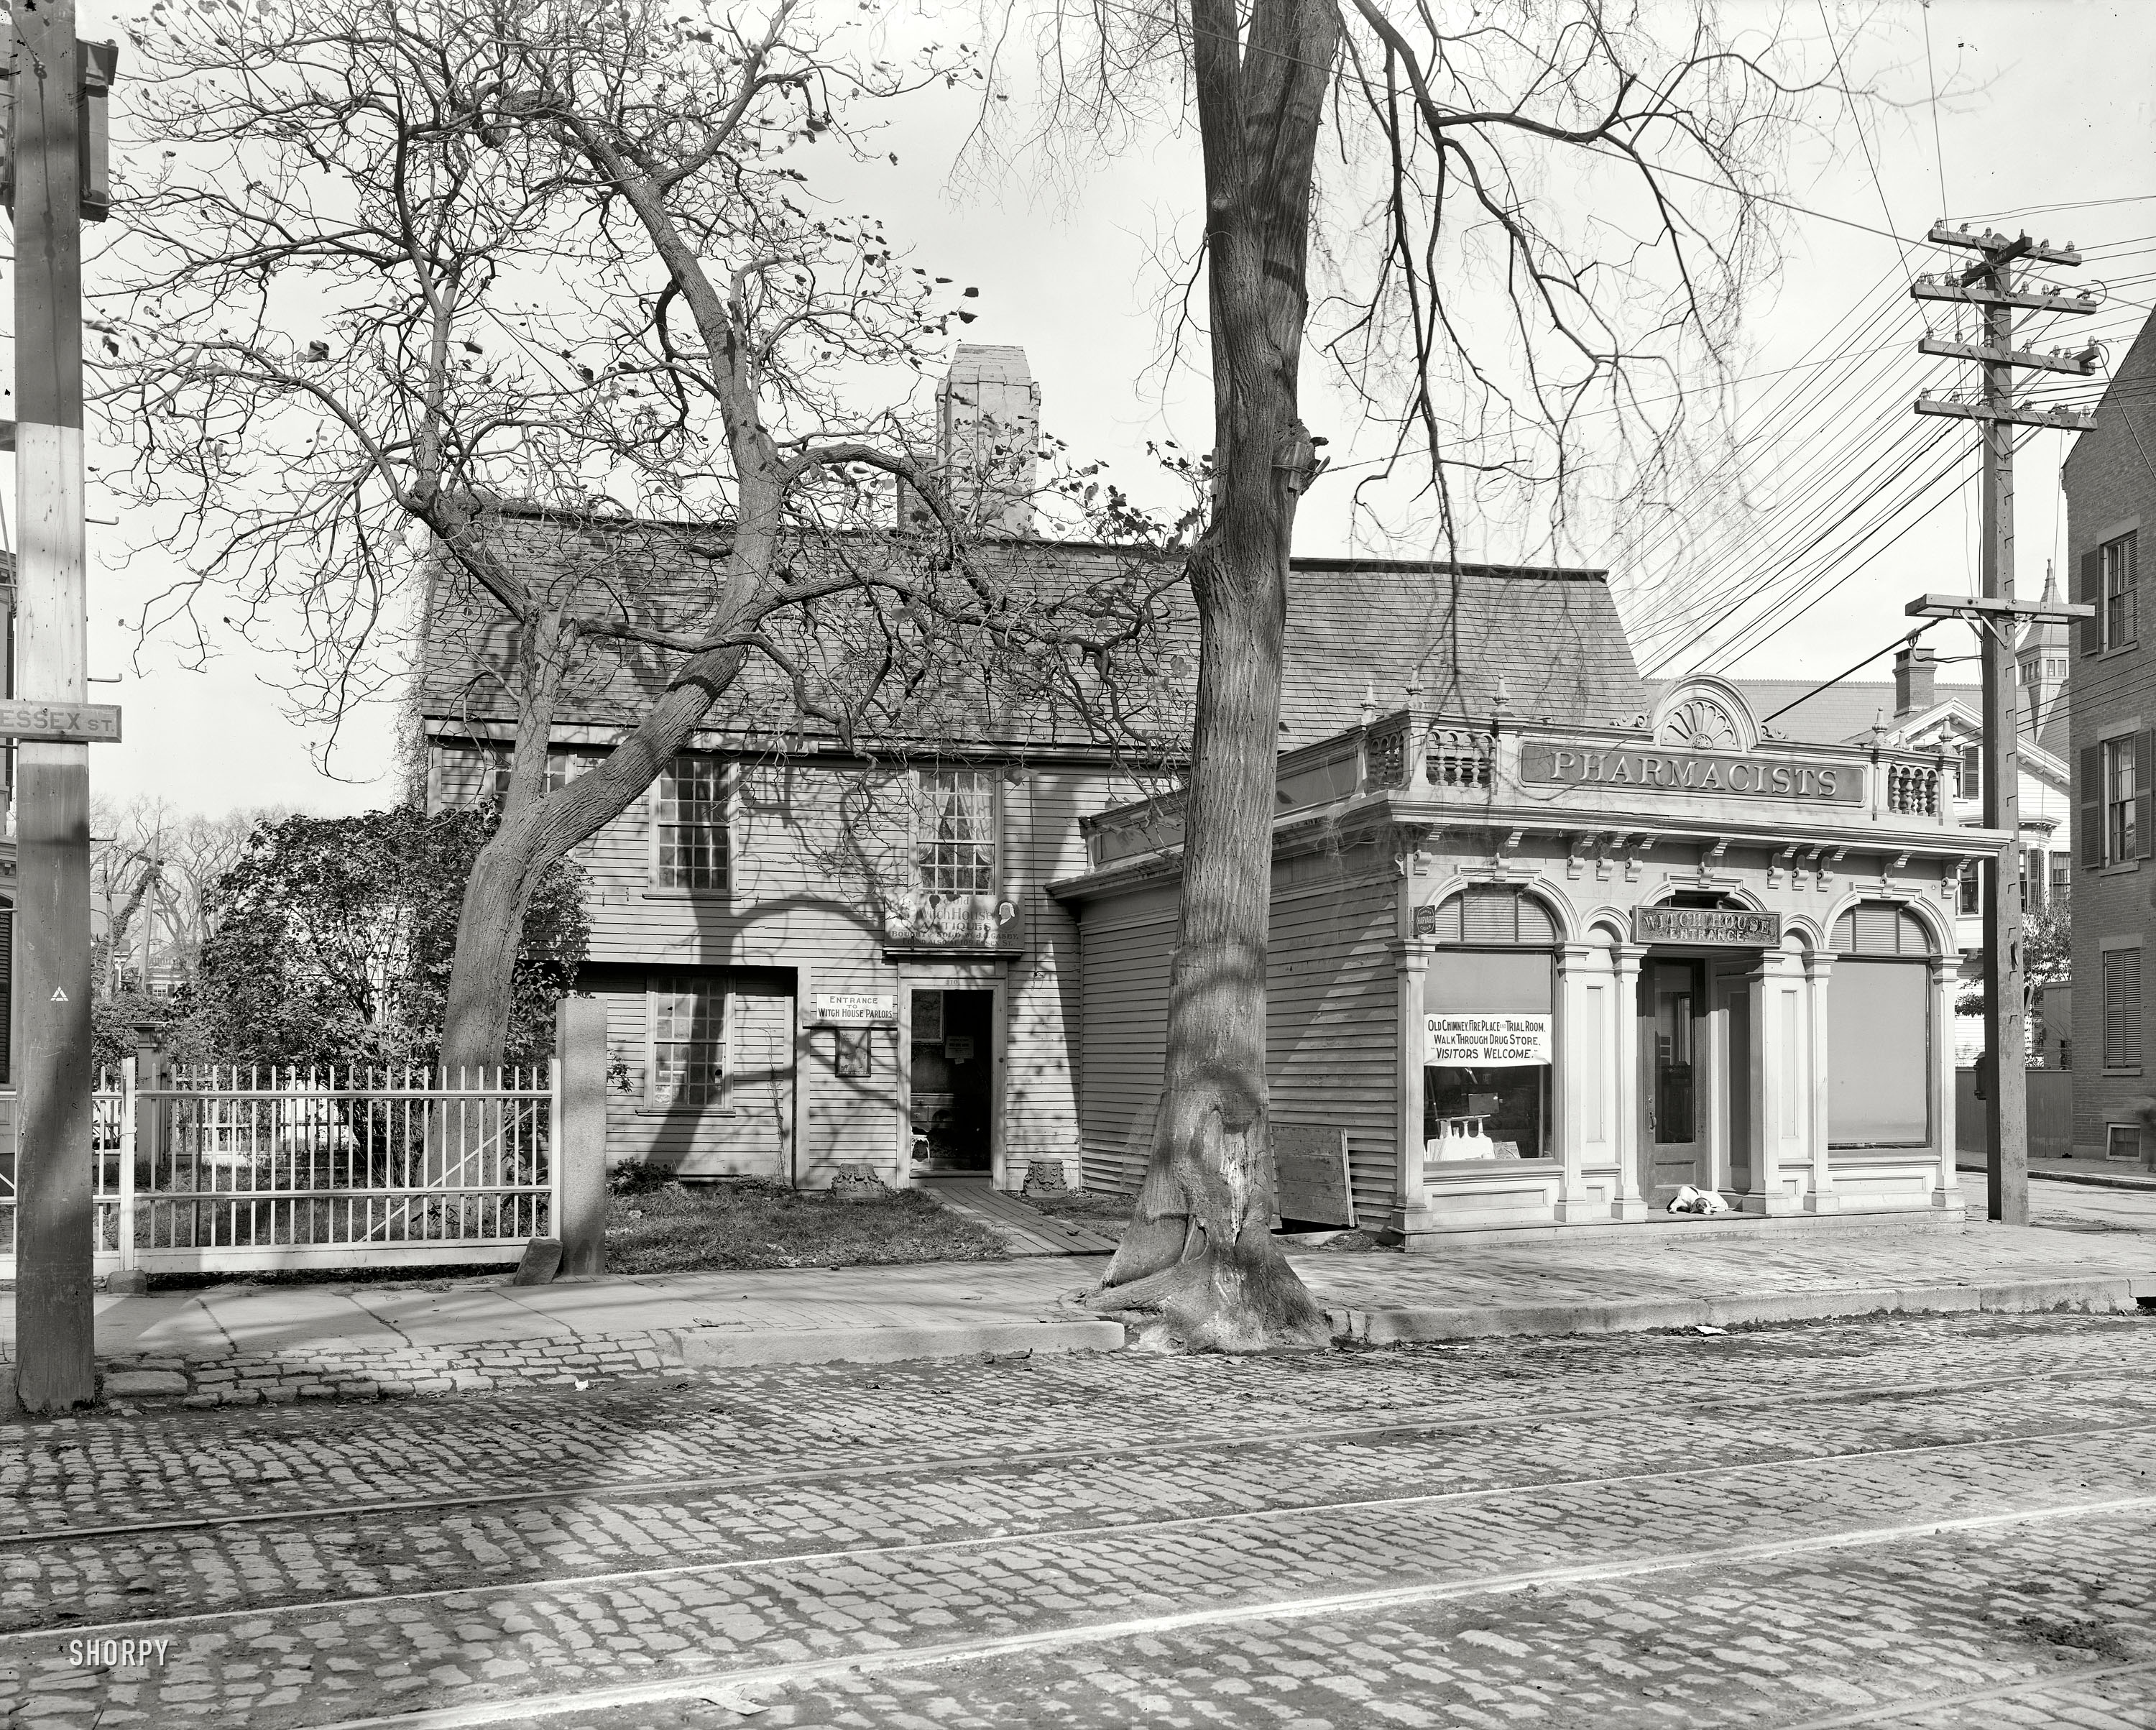 Salem, Massachusetts, circa 1906. "The Old Witch House." In the best Early American tradition, a blending of history and retailing: The Witch House Parlors (enter through the antique store) and Witch House Trial Room (right this way through the pharmacy). 8x10 glass negative, Detroit Publishing. View full size.